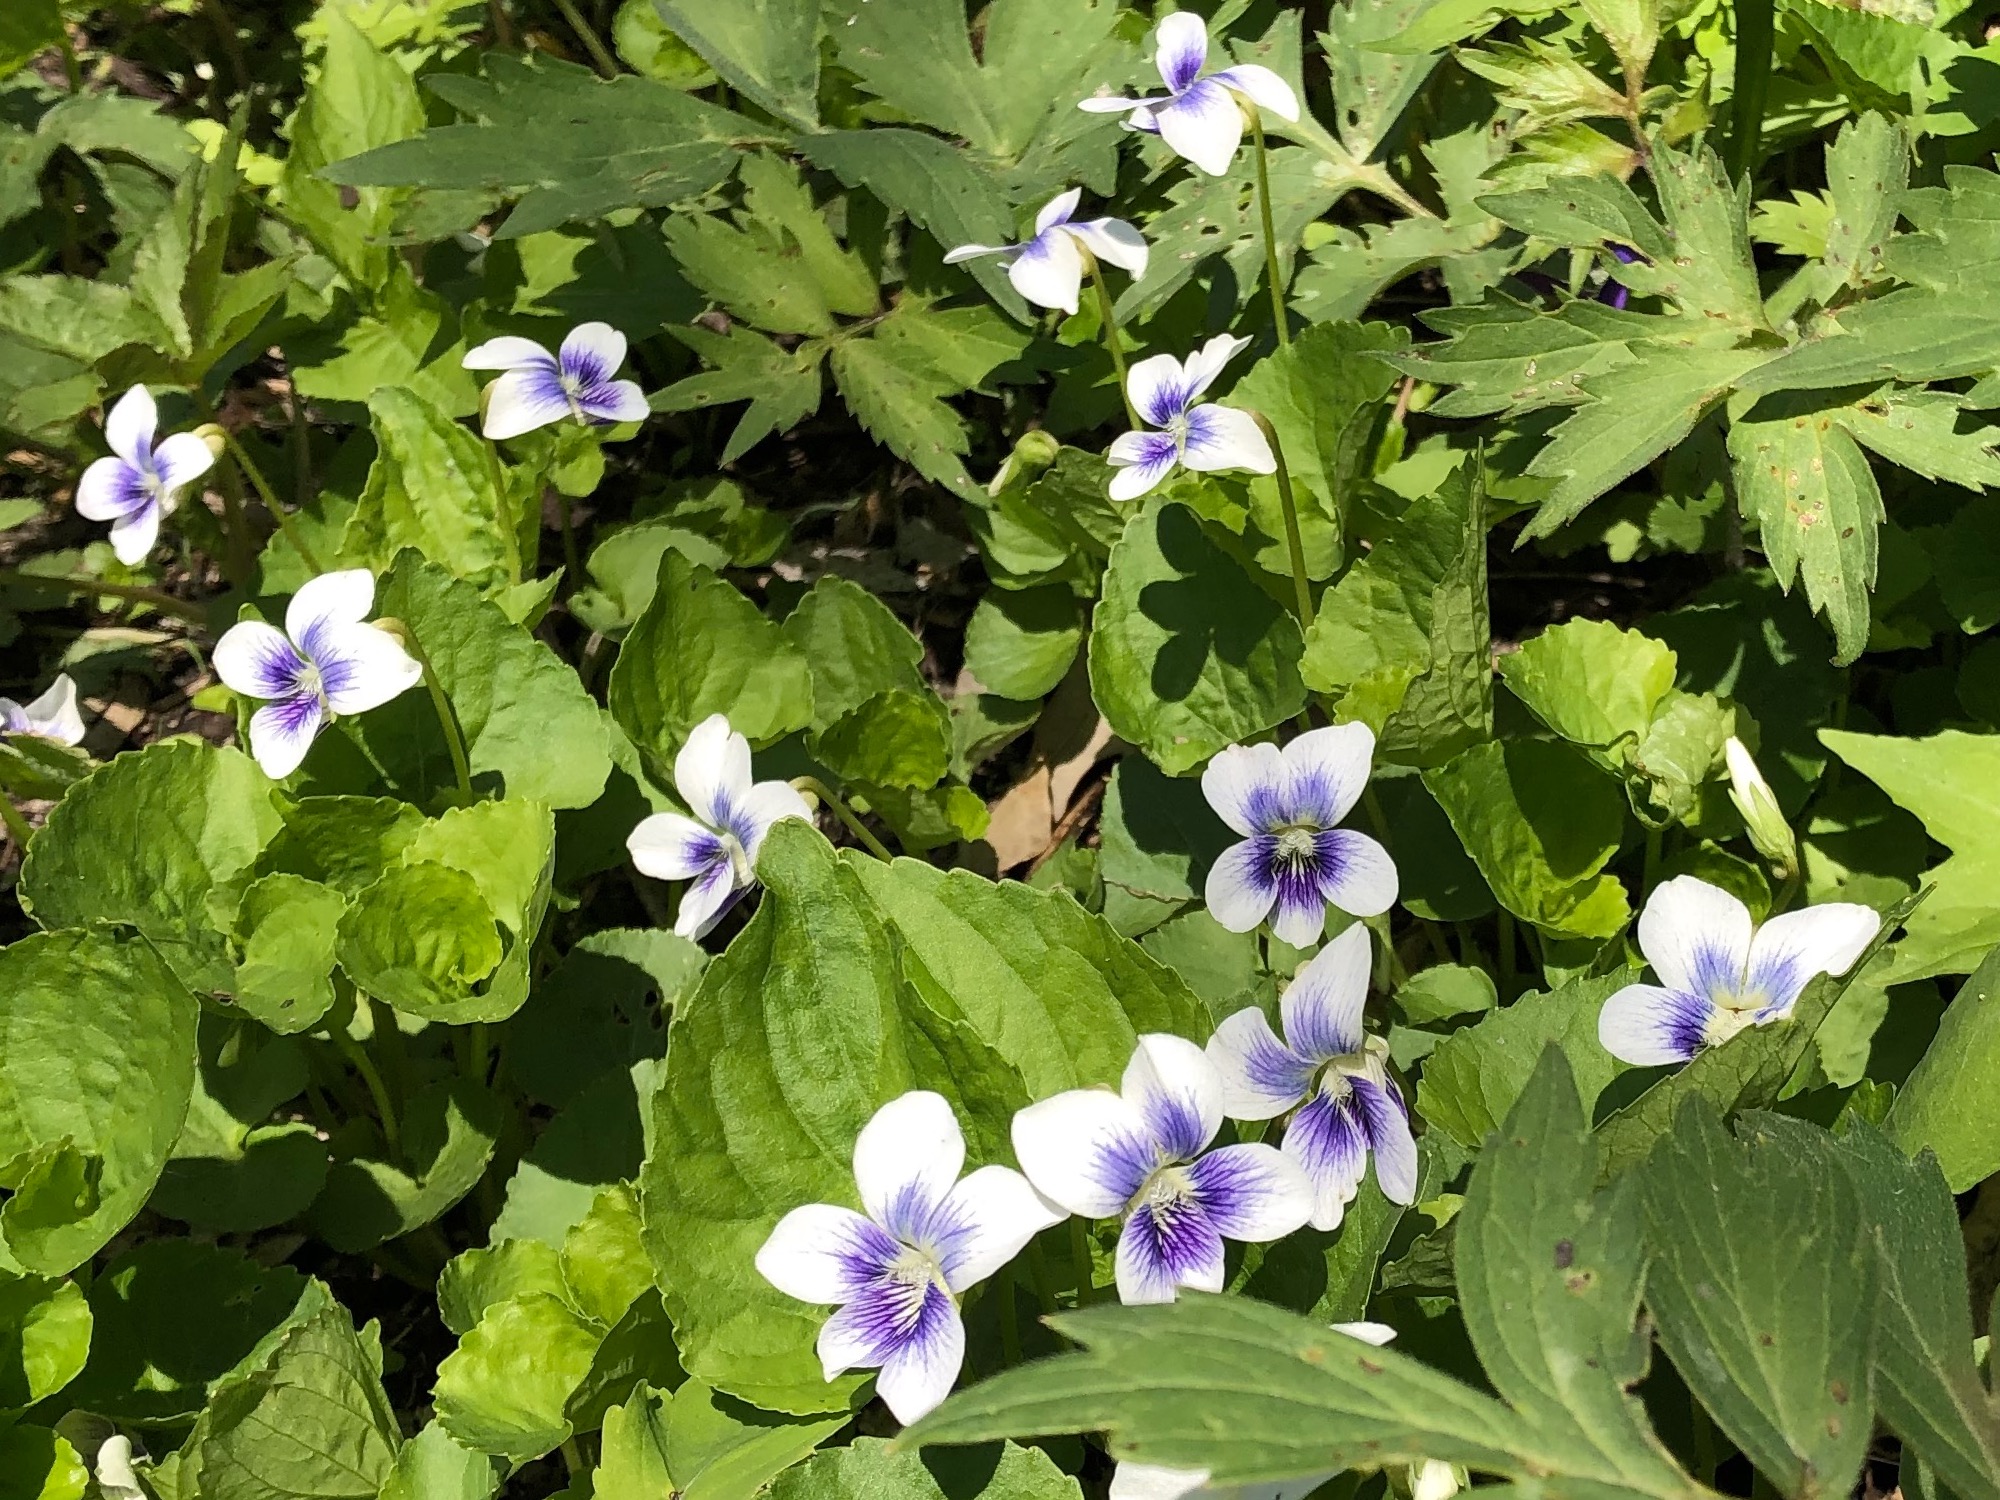 Wood Violets near the Duck Pond on May 5, 2019.